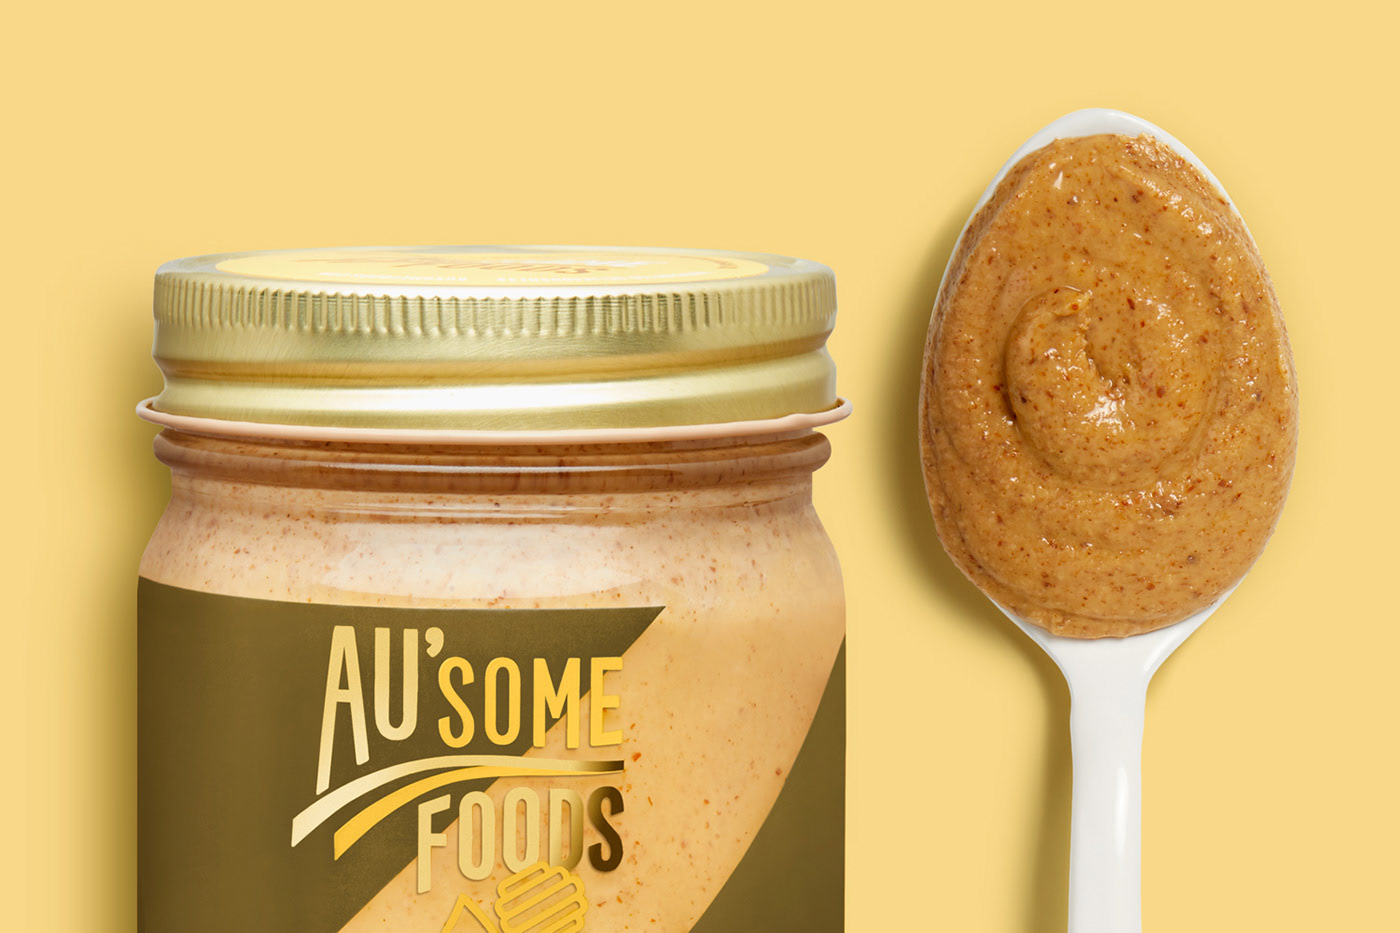 Au'some Foods Almond Butter.